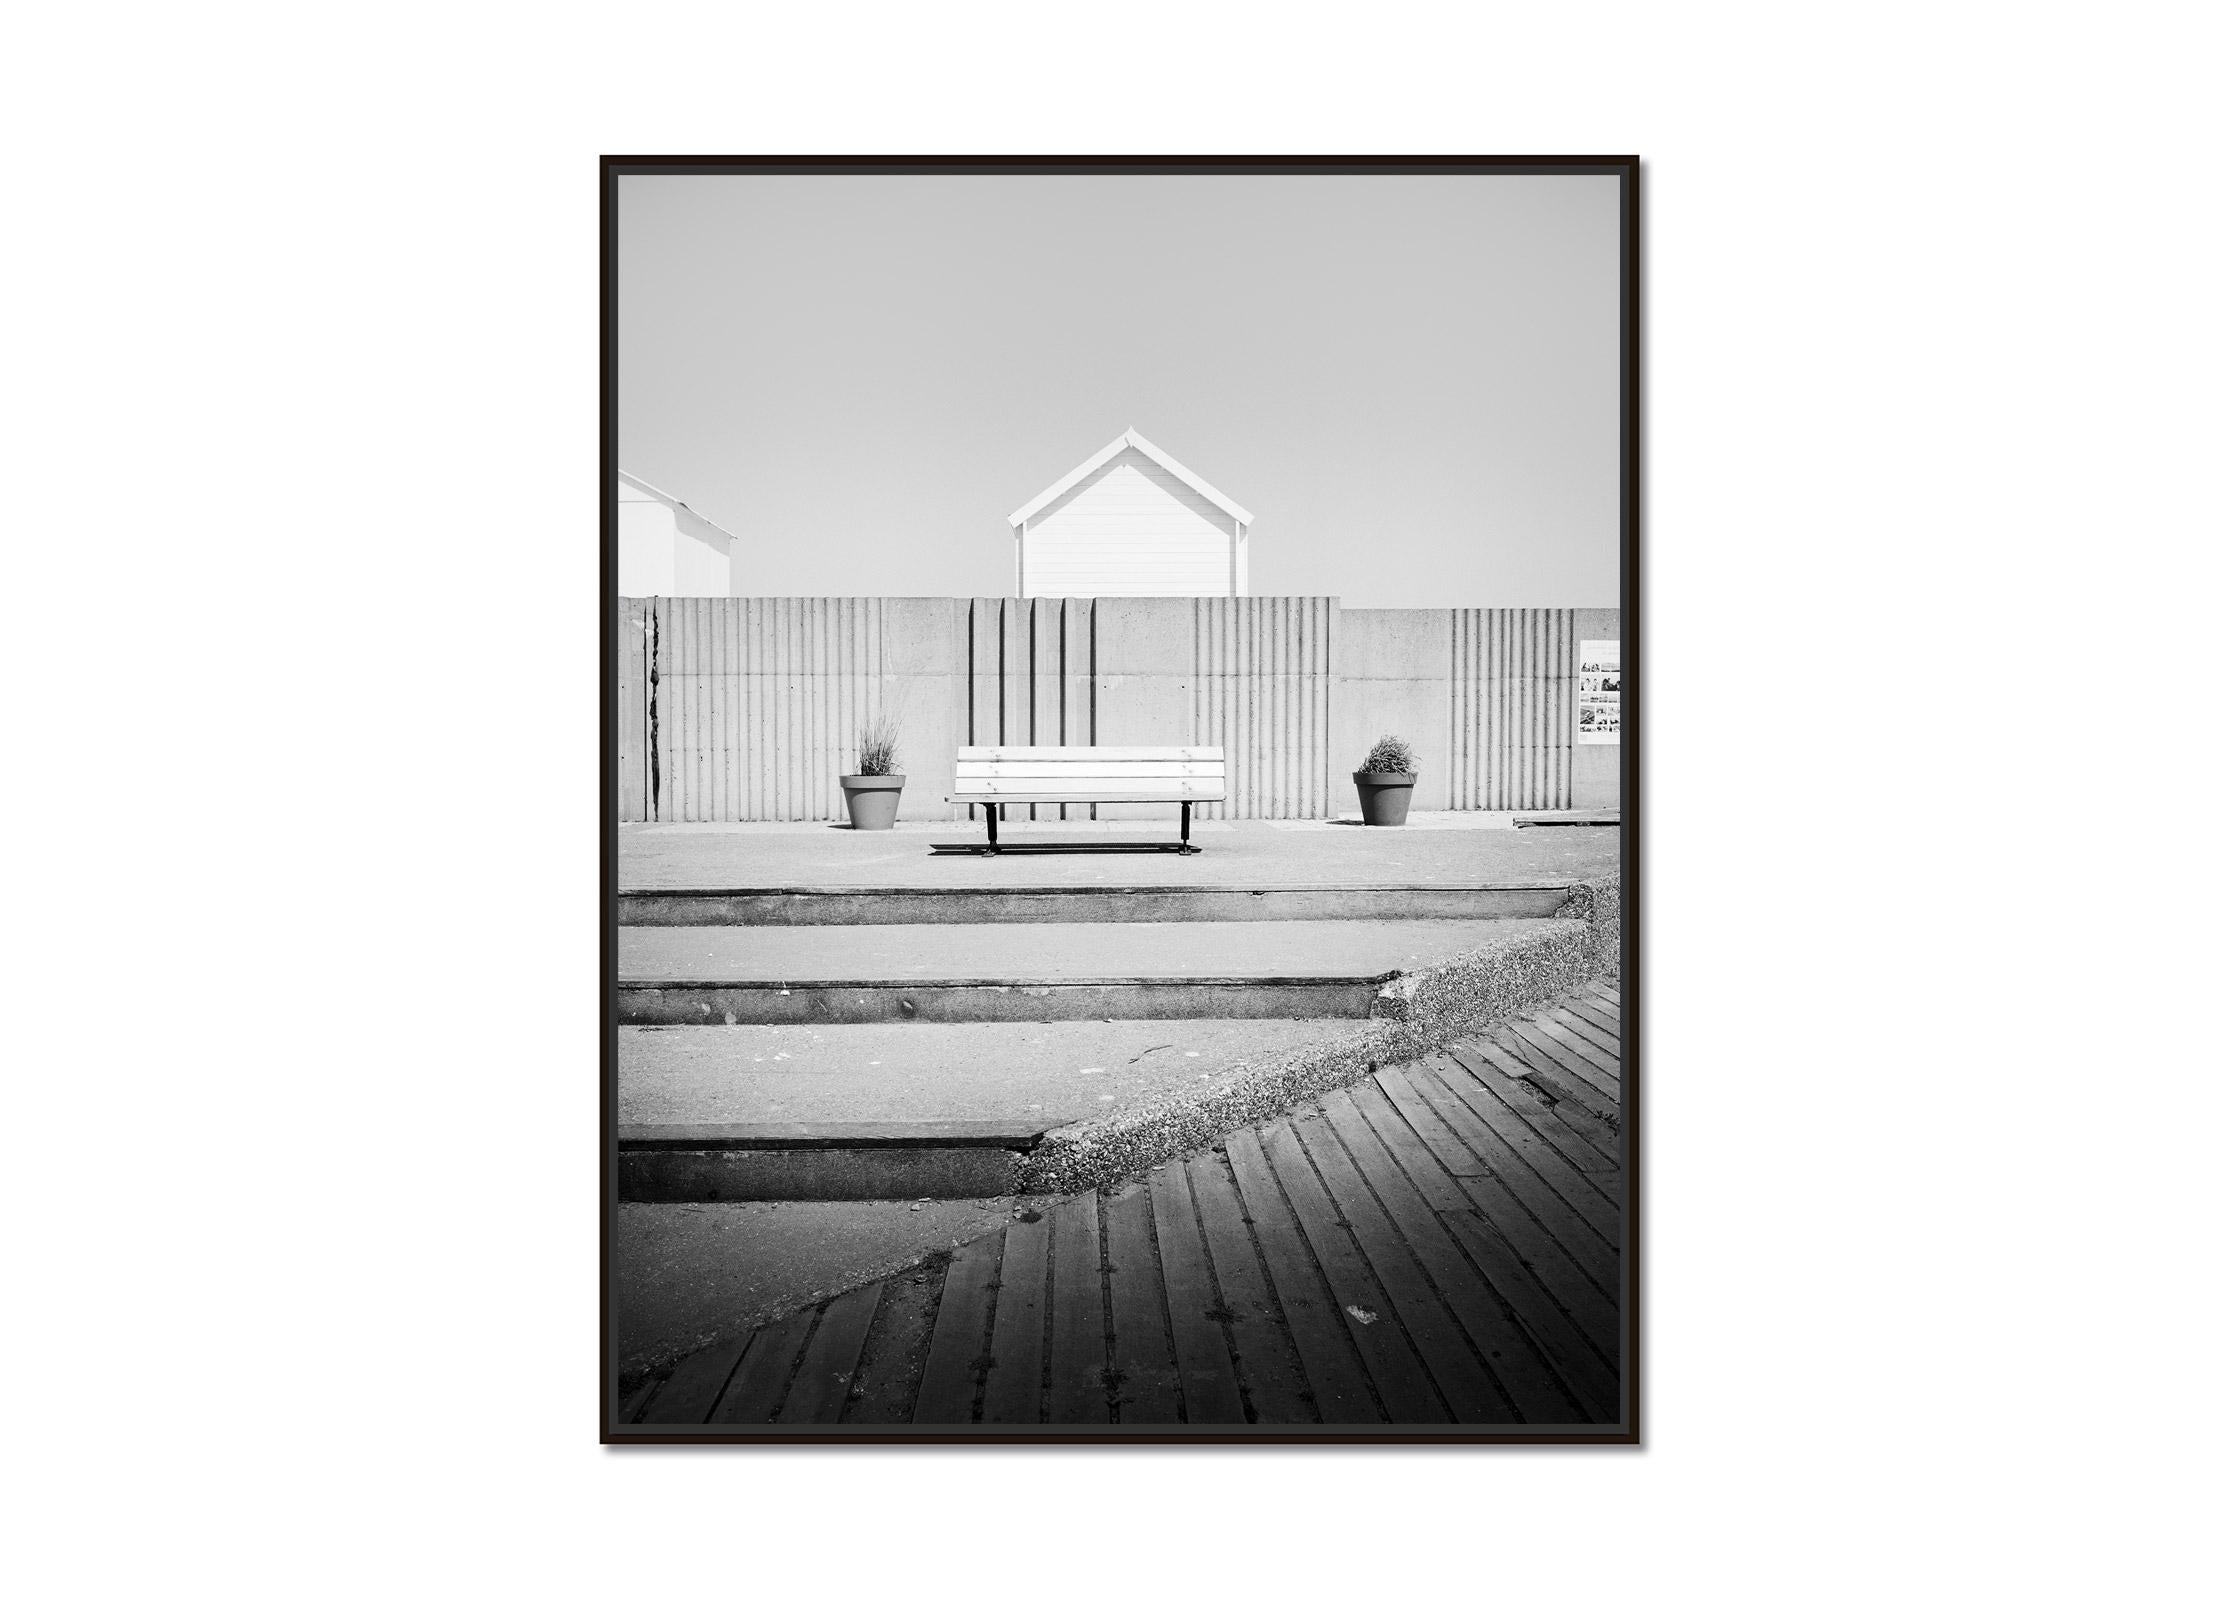 Esplanade, Beach Huts, France, minimalist black and white landscape photography - Photograph by Gerald Berghammer